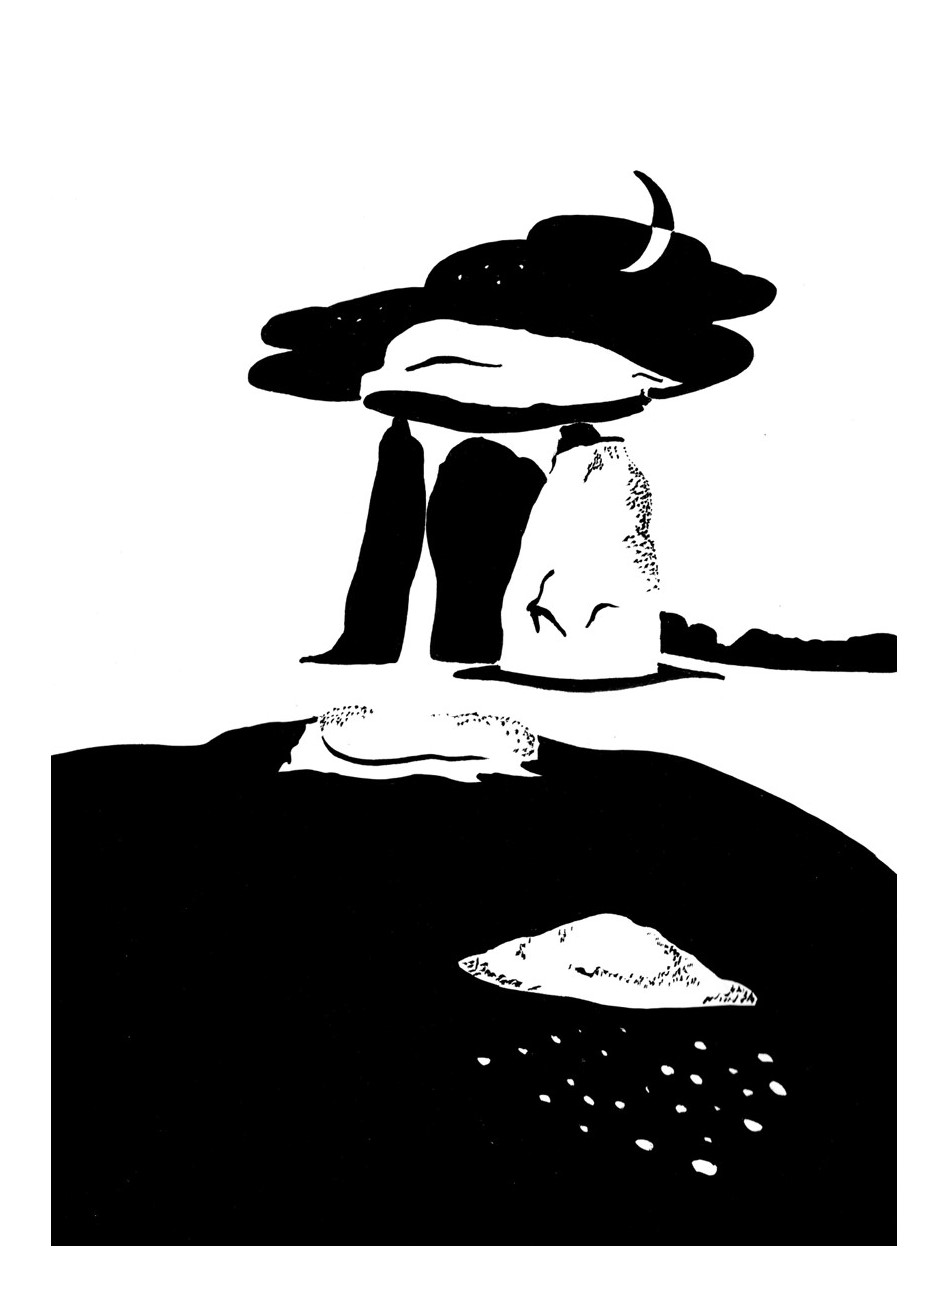 Black and white image of Stone Age cromlech